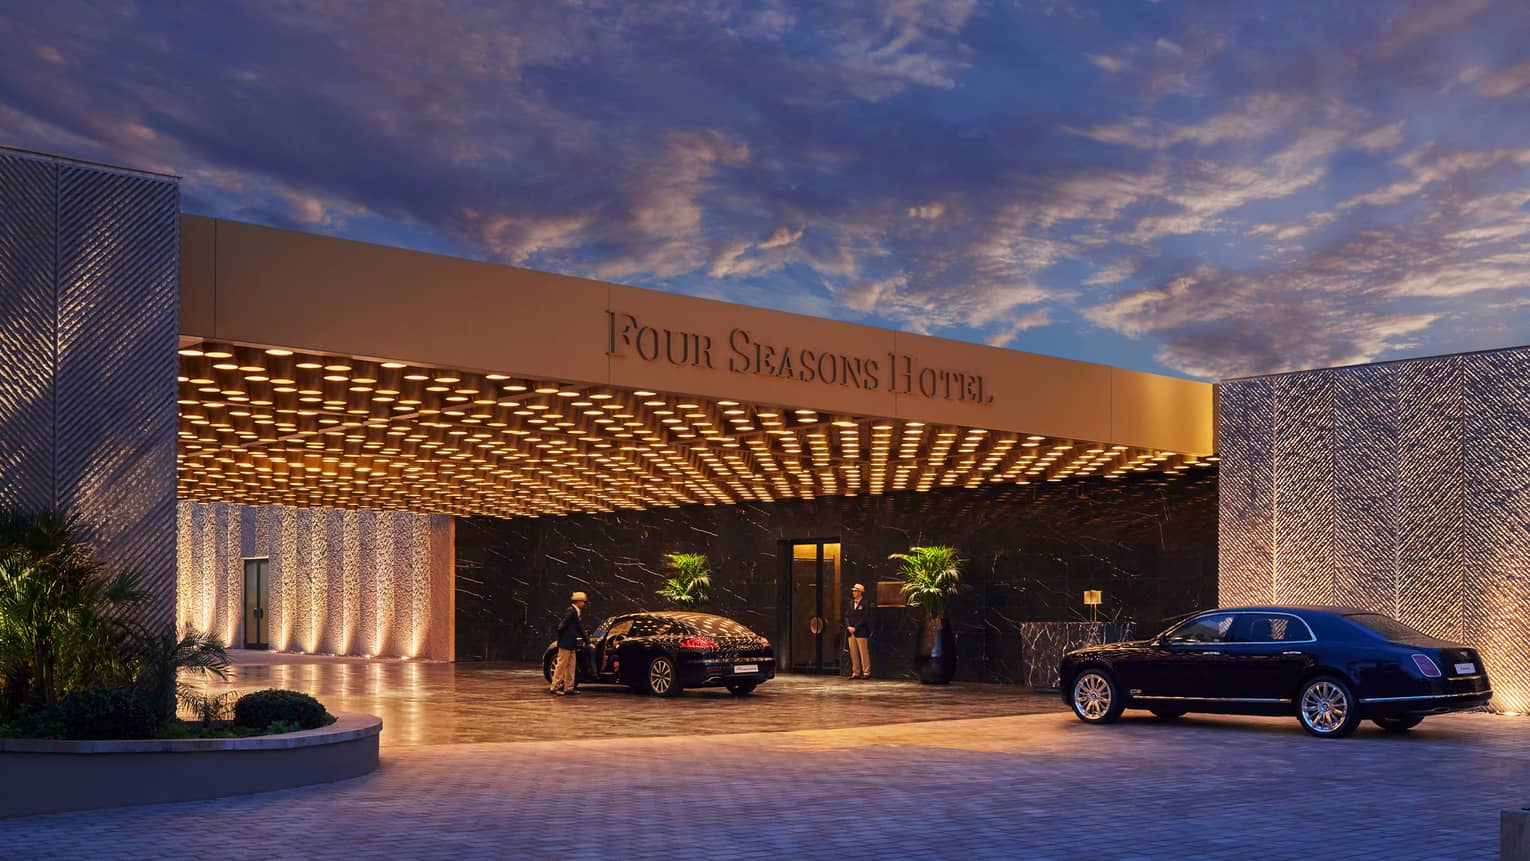 Modern Four Seasons Hotel Casablanca entrance at nights with lights, luxury cars